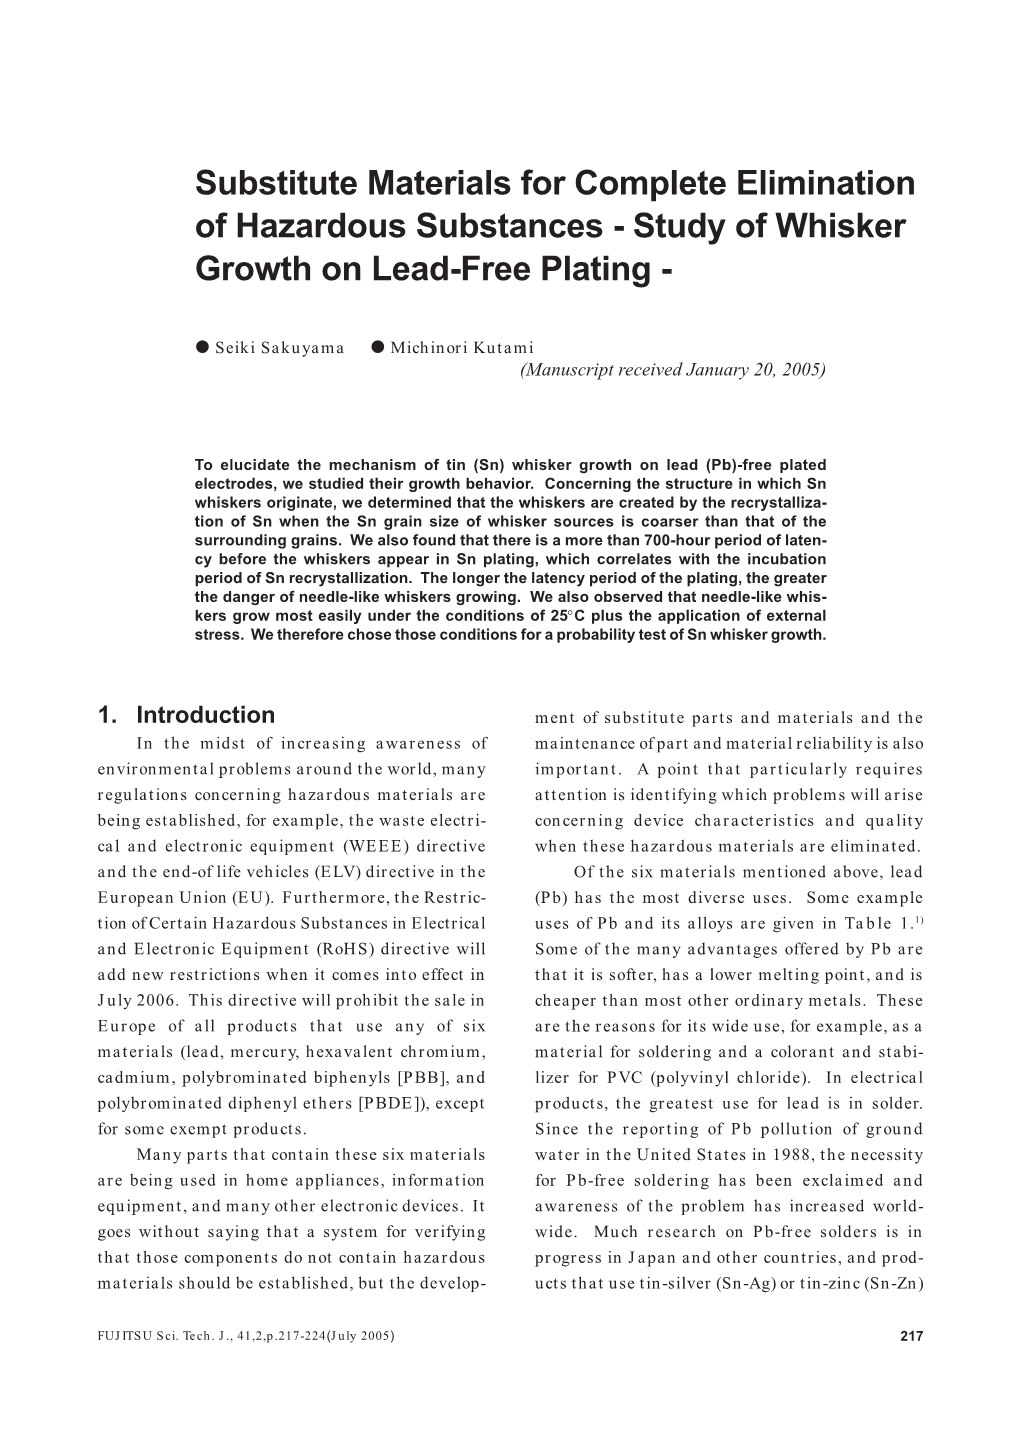 Study of Whisker Growth on Lead-Free Plating